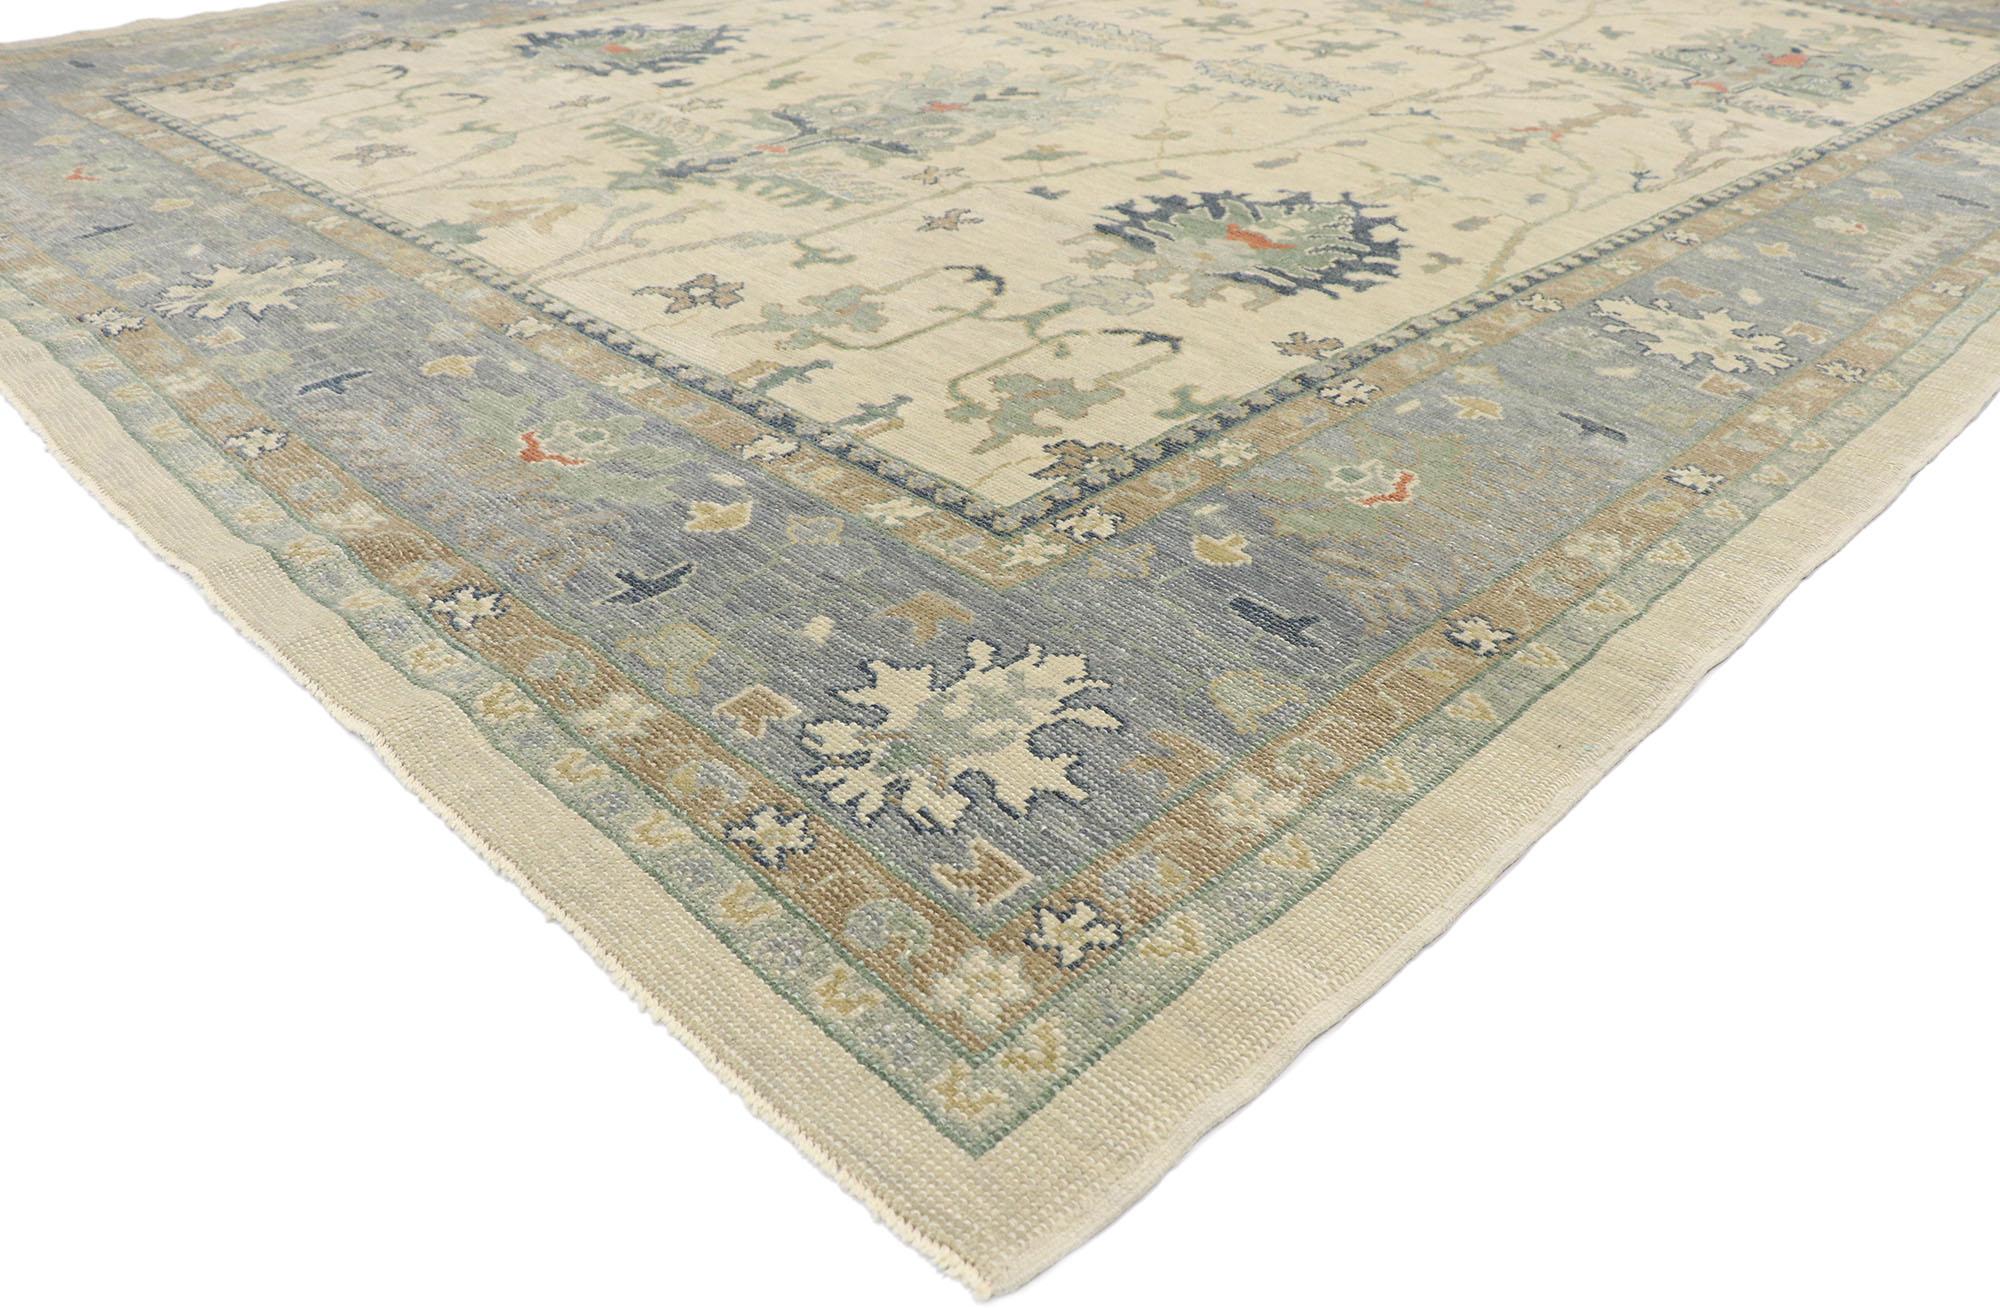 53492 New contemporary Turkish Oushak rug with Modern Coastal style. This hand-knotted wool contemporary Turkish Oushak rug features an all-over botanical pattern spread across an abrashed sandy-beige field. An array of botanical motifs decorates